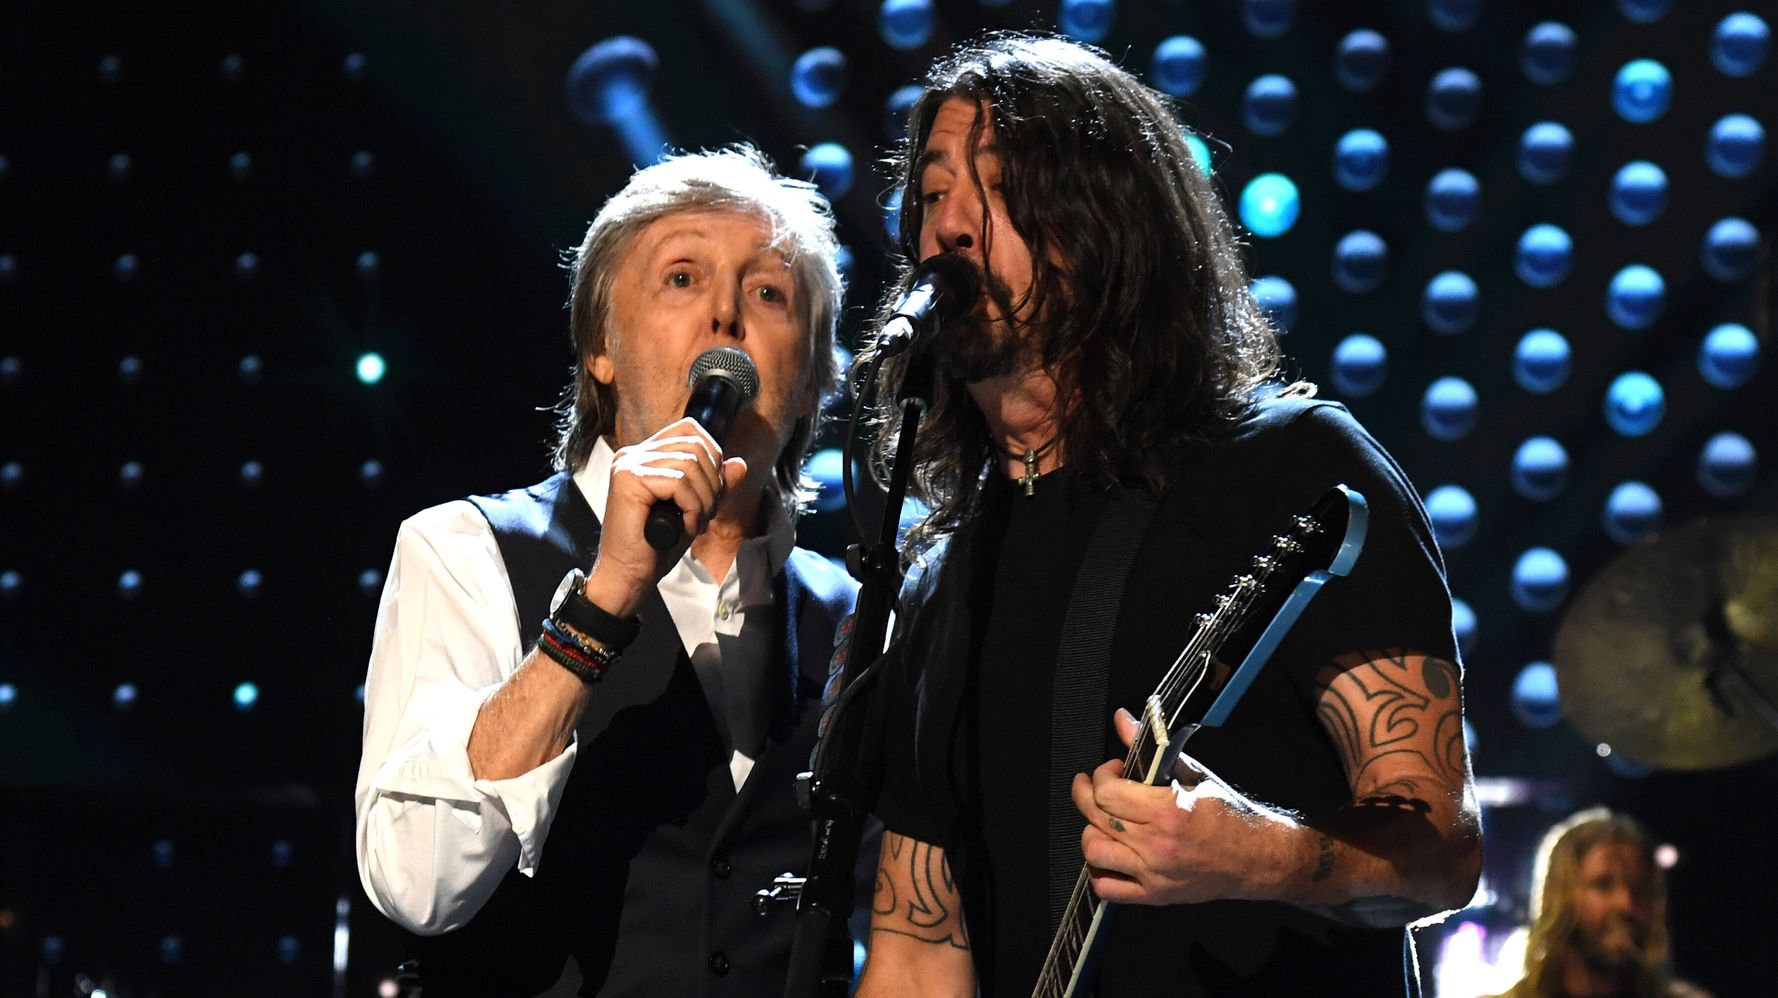 Foo Fighters, Paul McCartney Nominated For 2 Of The Same Grammys | HuffPost Entertainment